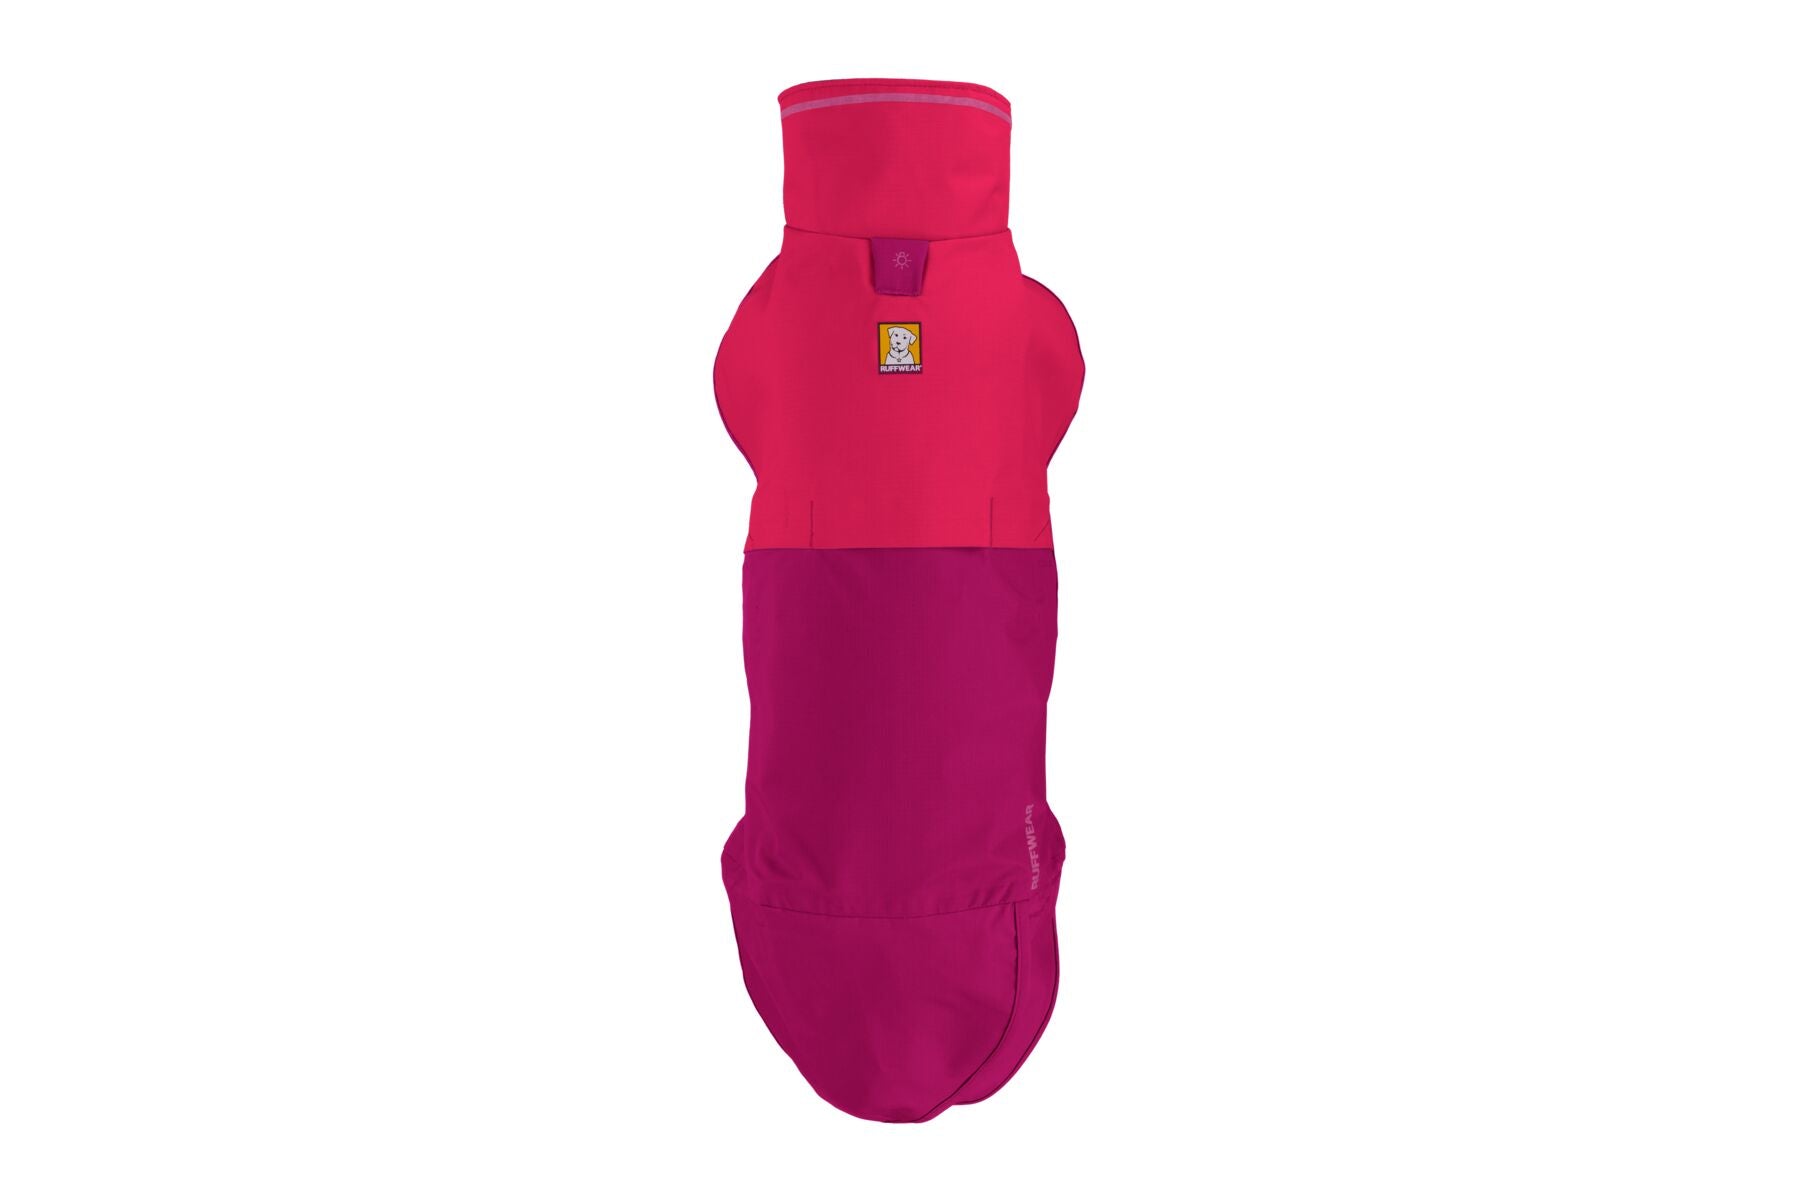 Sun Shower® Chaleco Impermeable para Perros- Rosa Magenta (Hibiscus Pink)- Ruffwear®